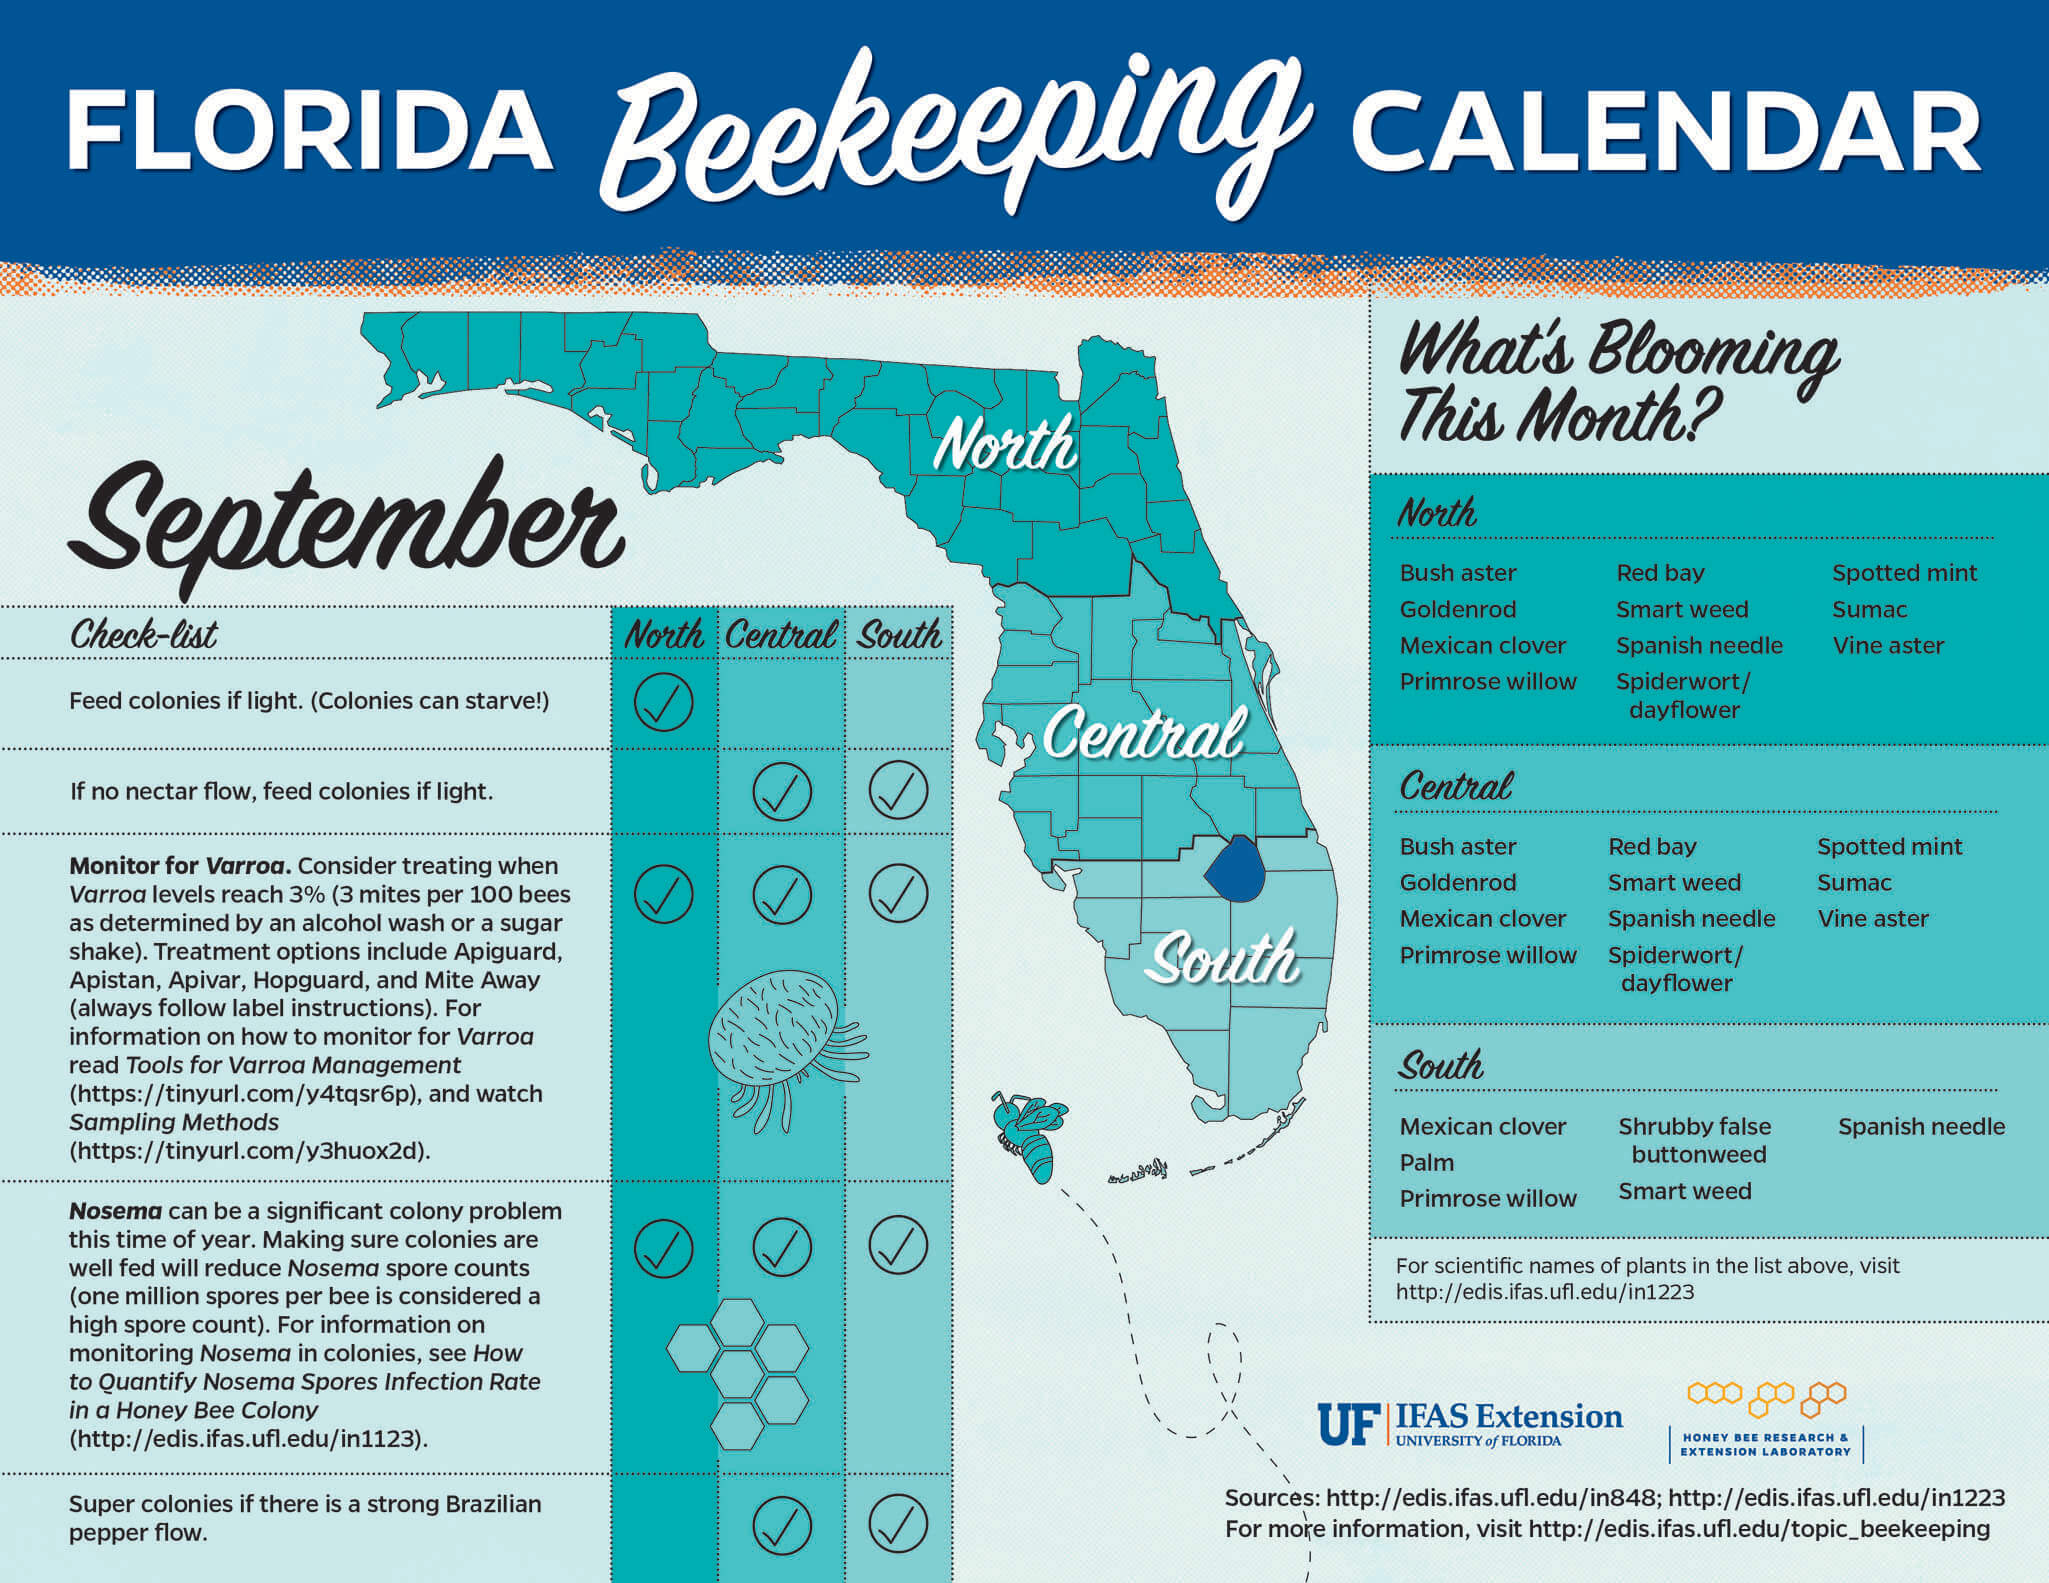 Florida beekeeping calendar for the month of September